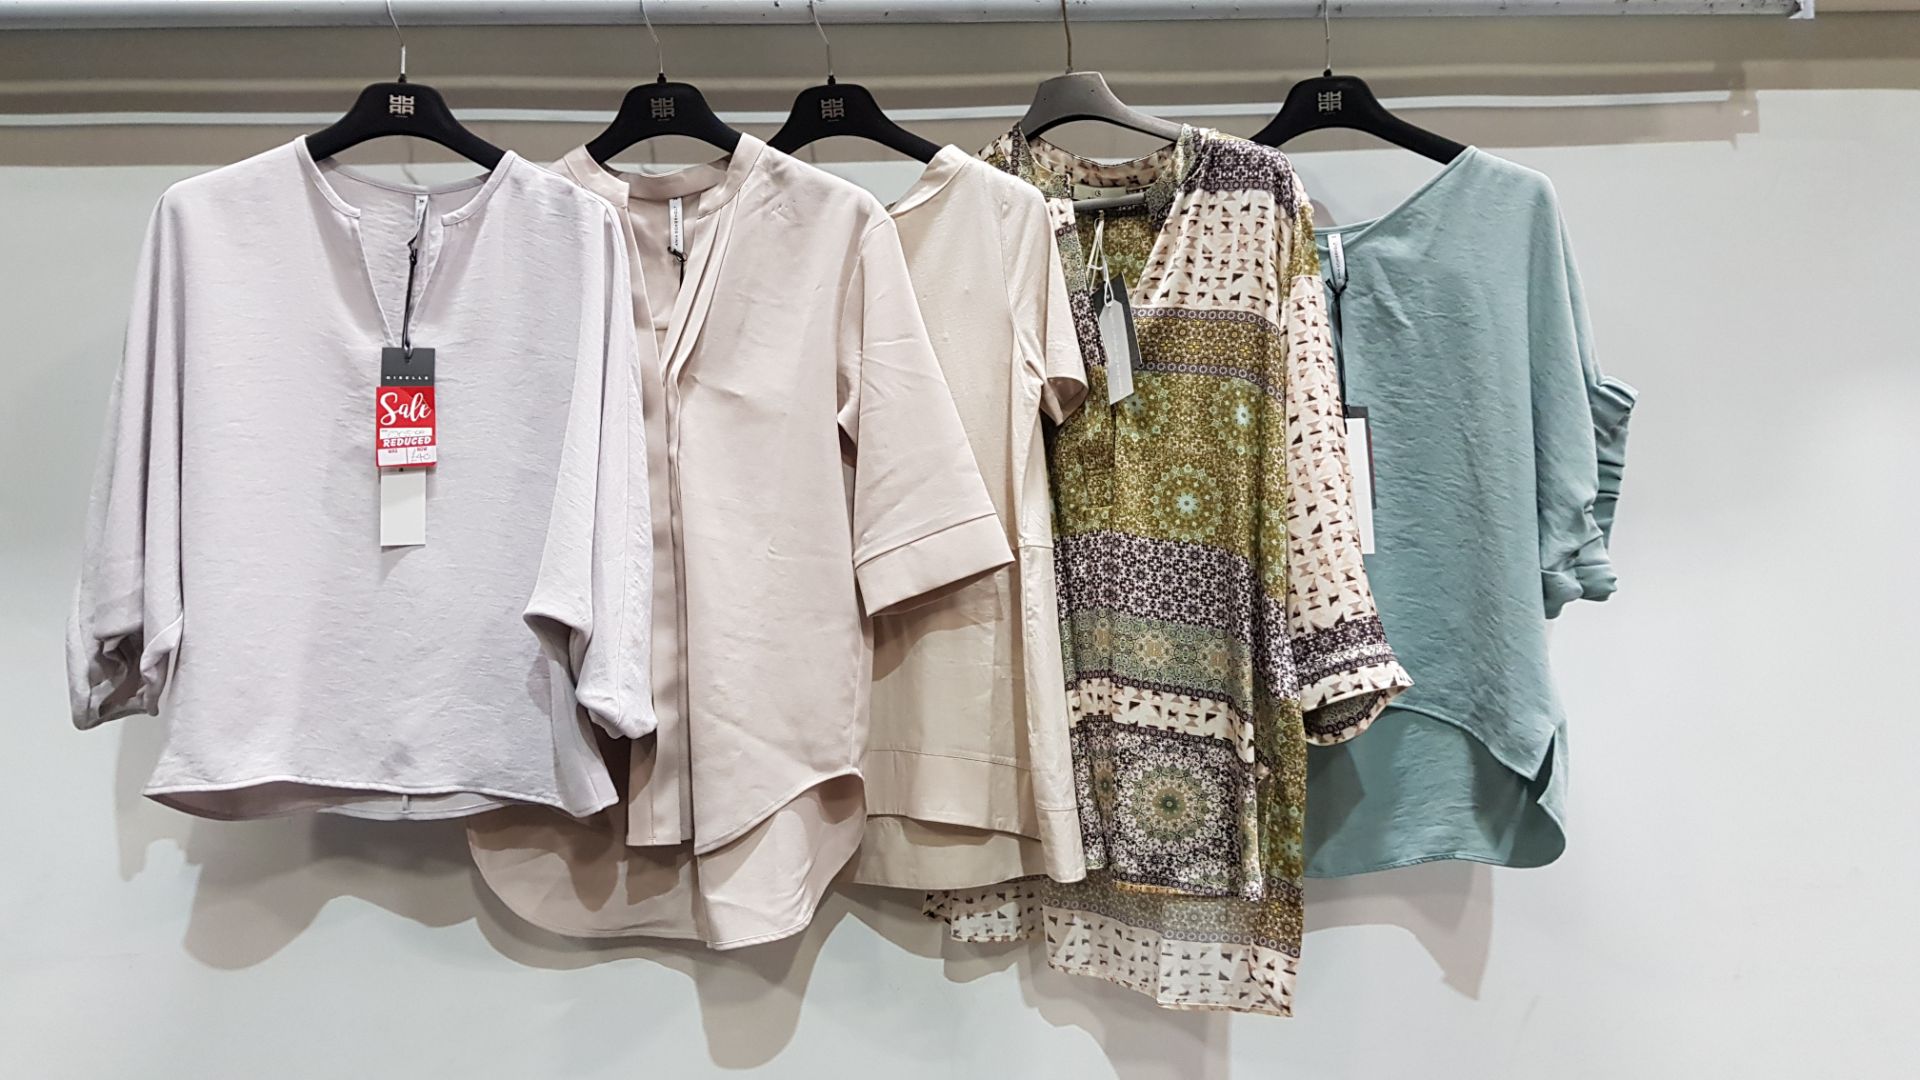 5 PIECE MIXED BRAND NEW CLOTHING LOT CONTAINING 3 X ANNIE SCHIERHOLT TOPS, 1 X ALPHA TOP AND 1 X